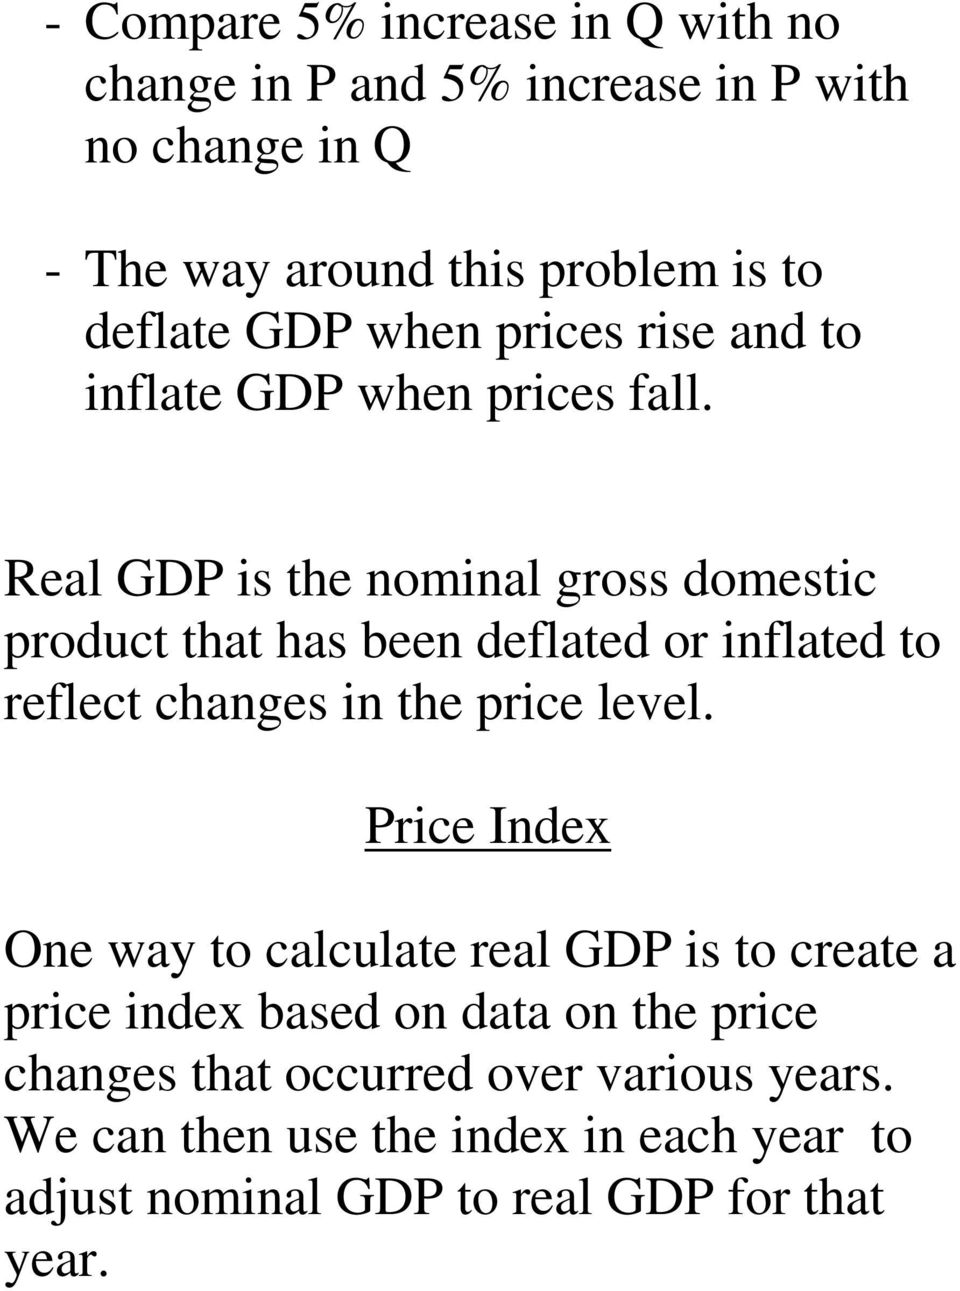 Real GDP is the nominal gross domestic product that has been deflated or inflated to reflect changes in the price level.